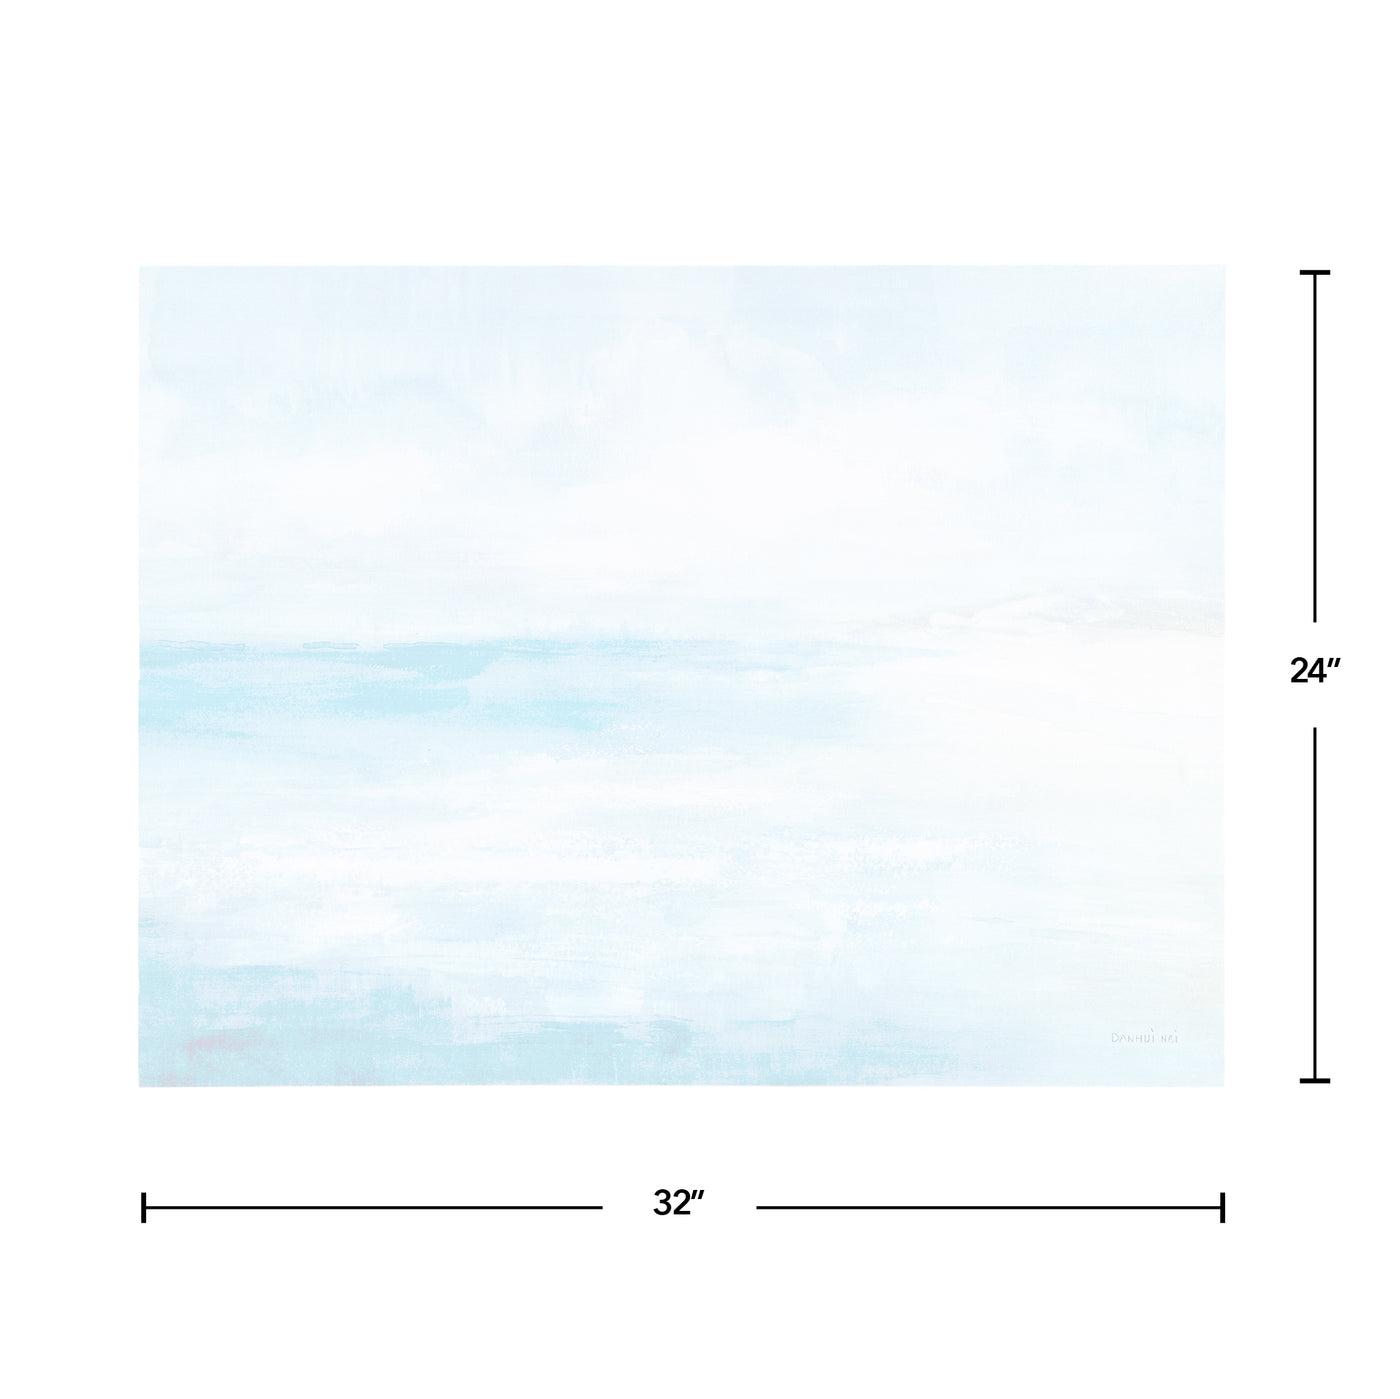 FirsTime & Co. Blue Bayview Horizon Canvas Wall Art, Coastal Style, Made of Canvas